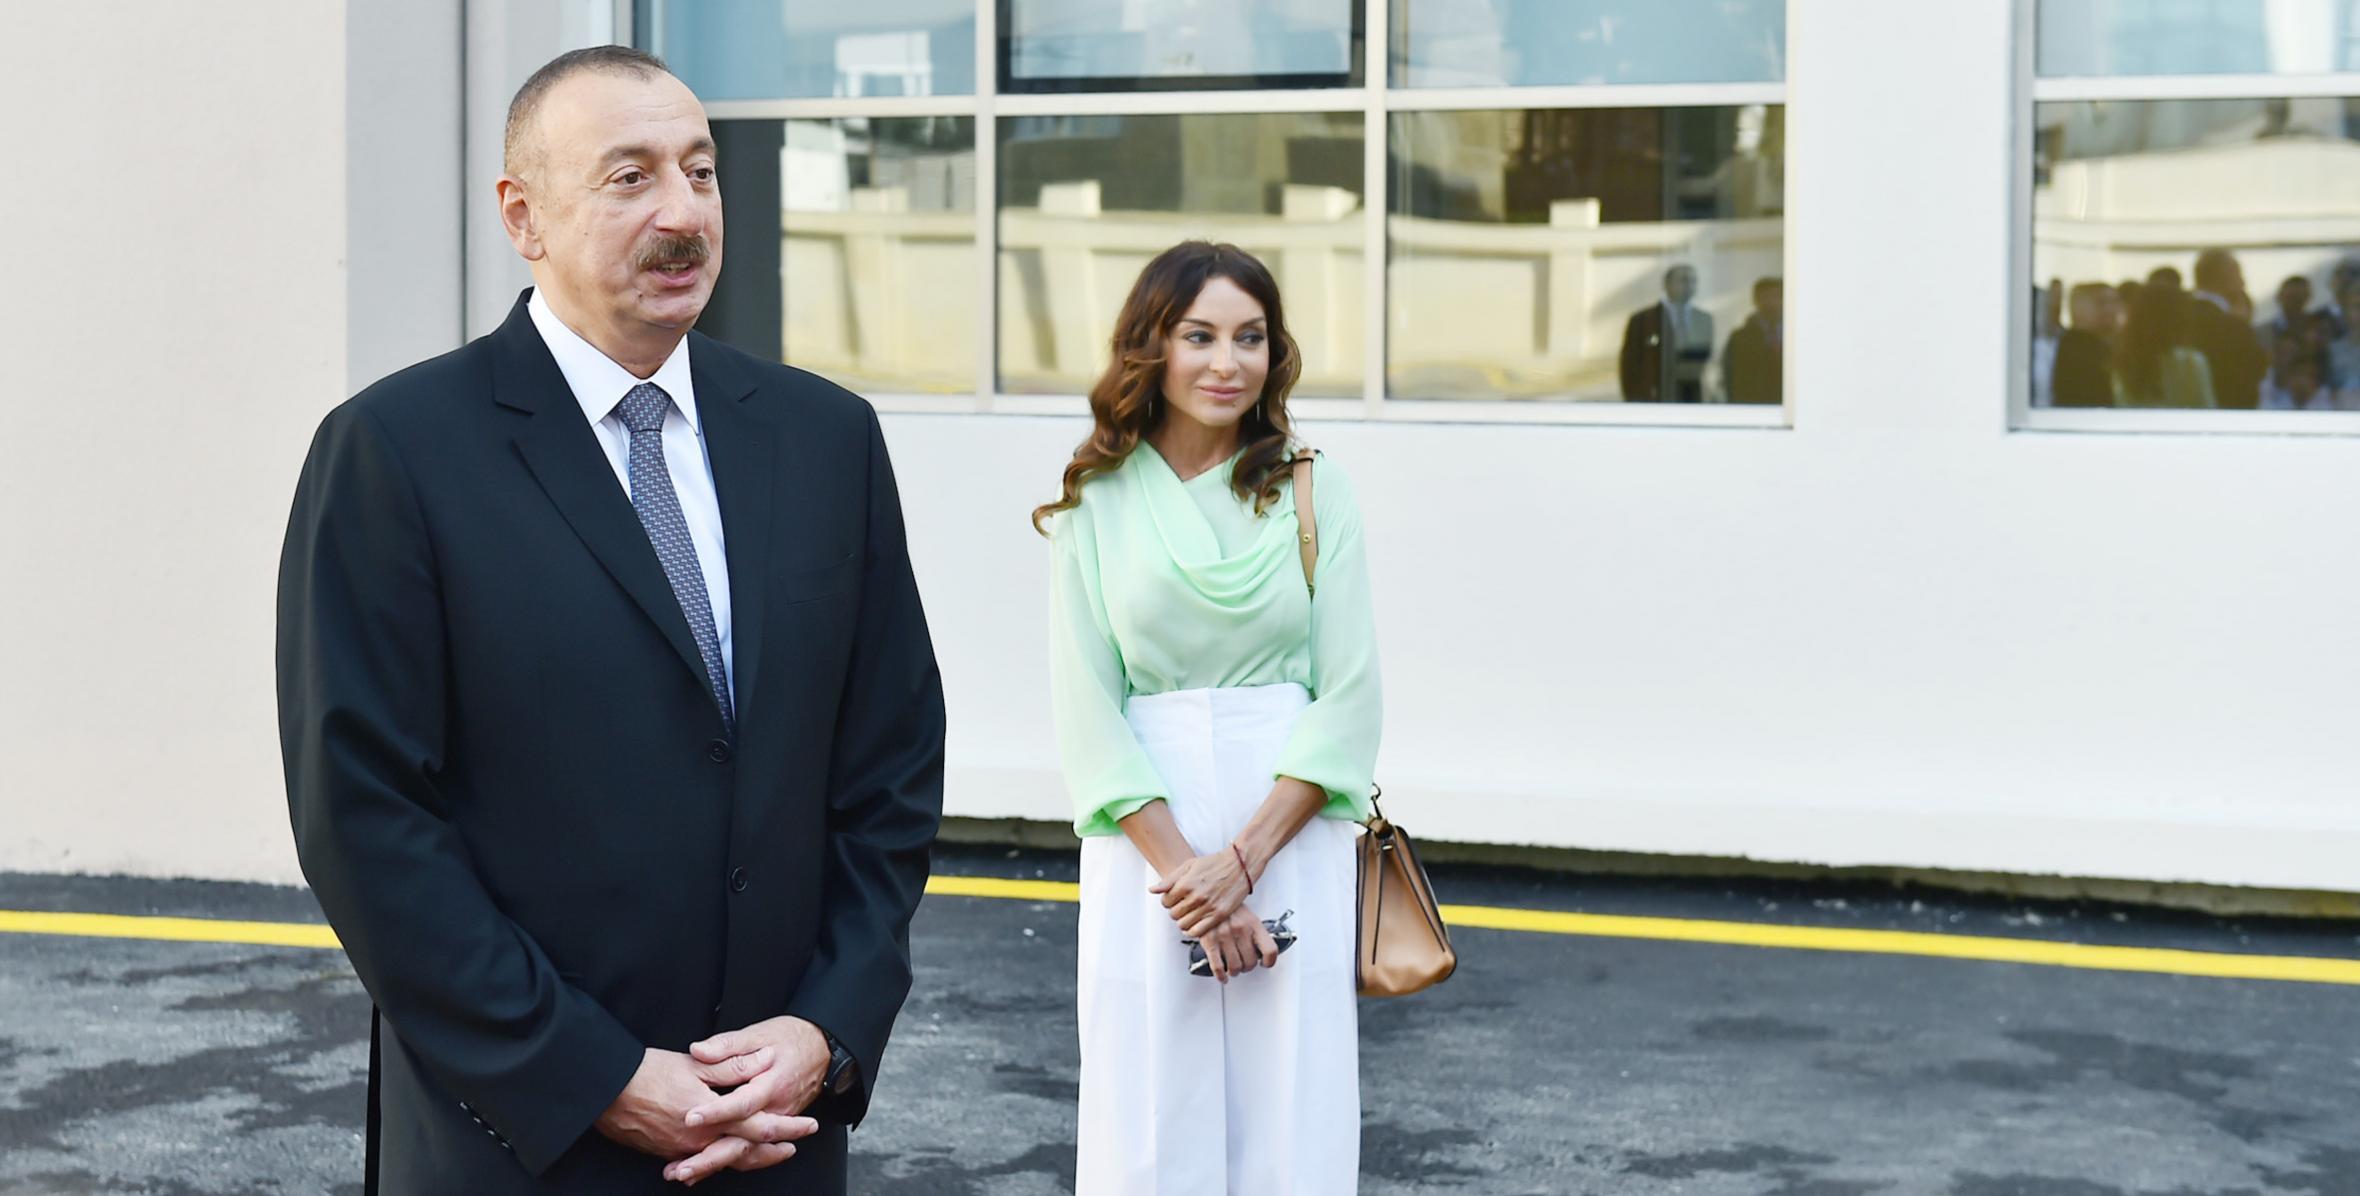 Speech by Ilham Aliyev at  the opening of new building of school-lyceum No 20 named after Arif Huseynzade in Baku